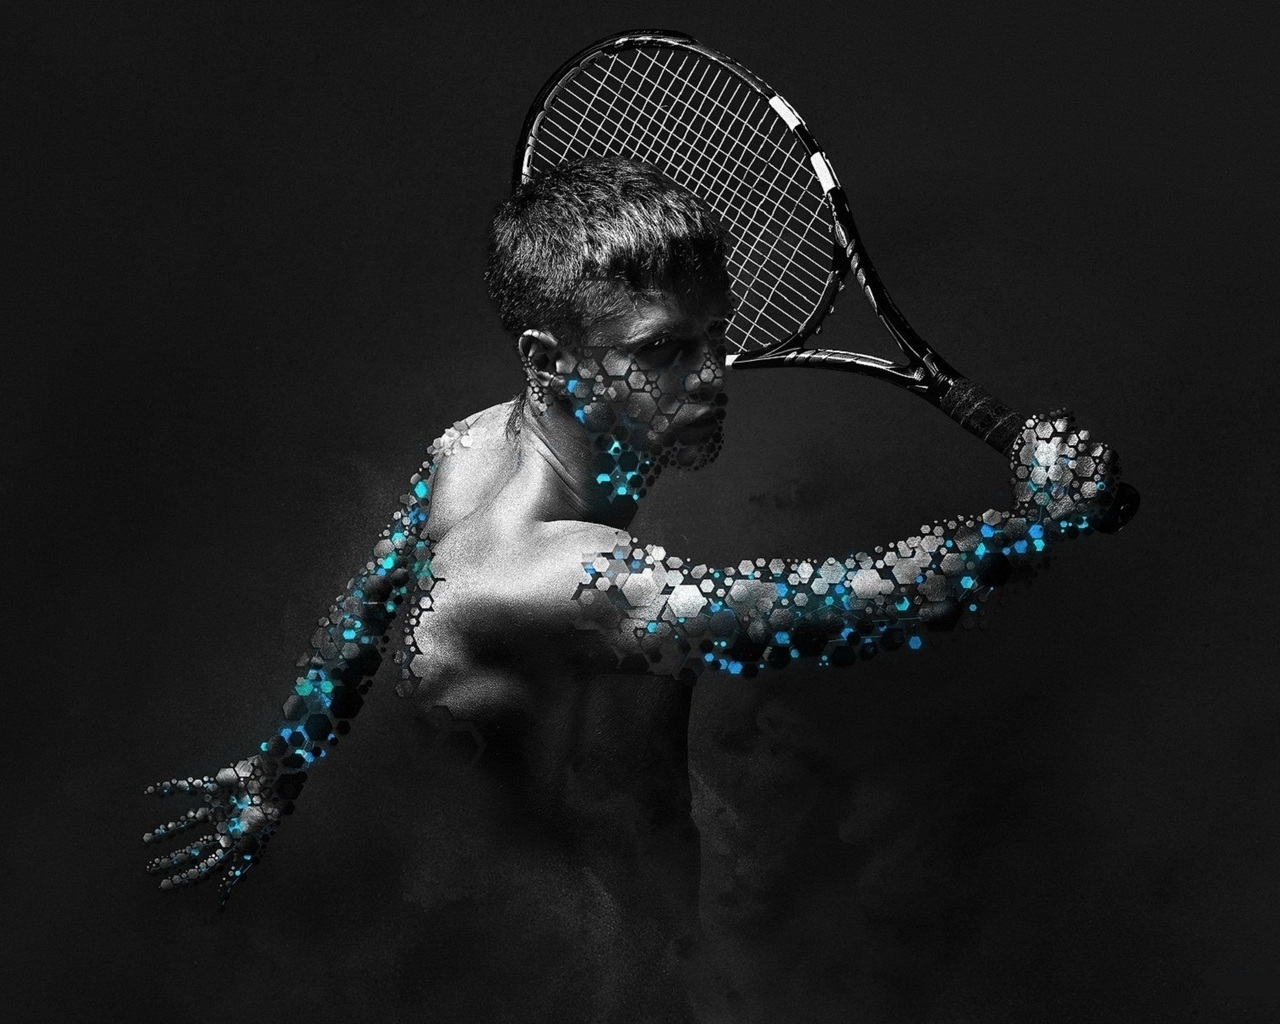 Tenis Player for 1280 x 1024 resolution